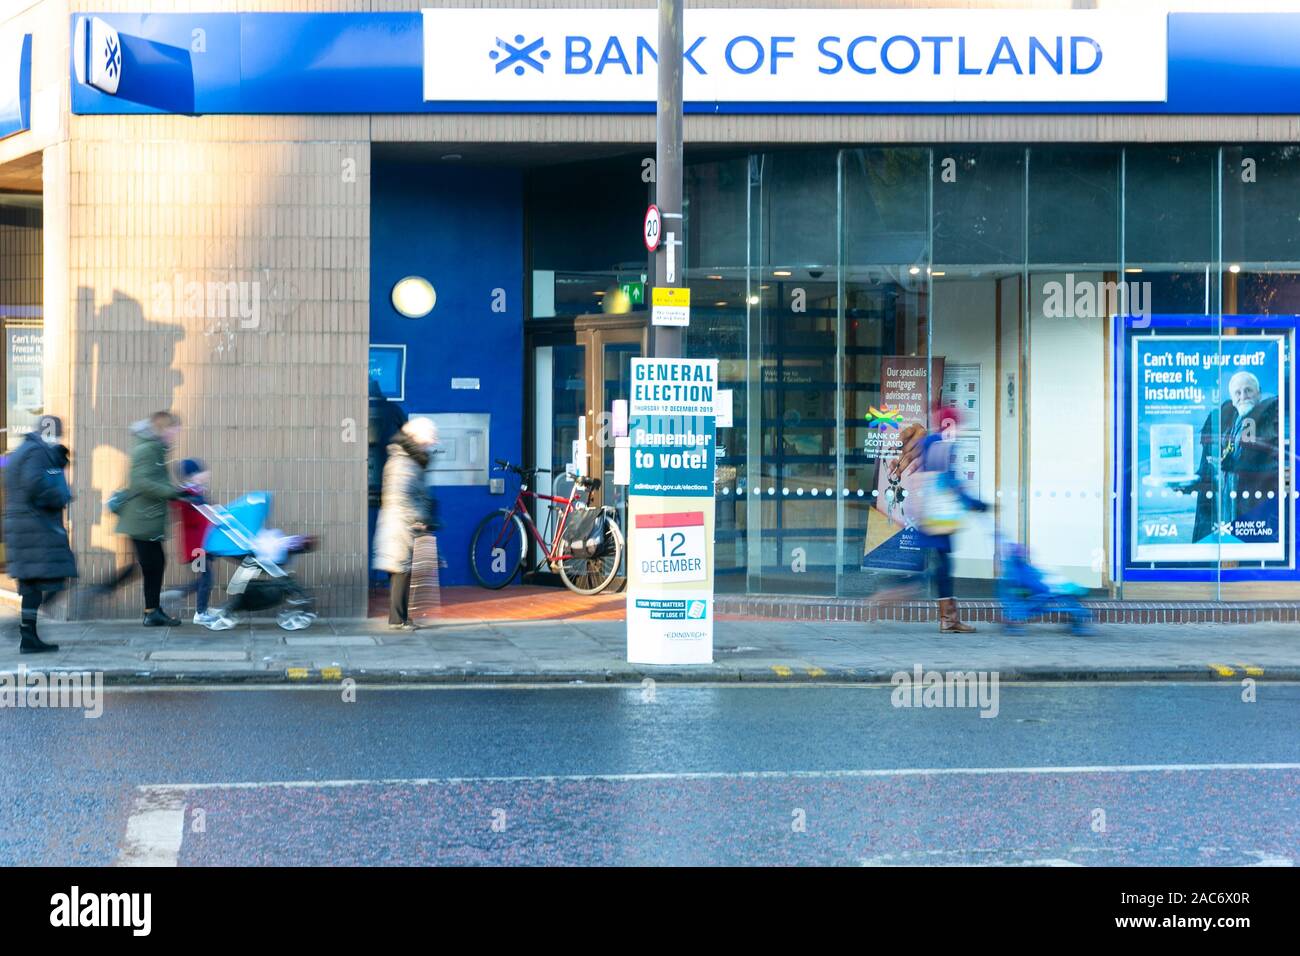 General Election 2019 in Edinburgh, Scotland sees Boards urging people to vote on 12th December 2019. This on is outside a Bank of Scotland Branch. Stock Photo